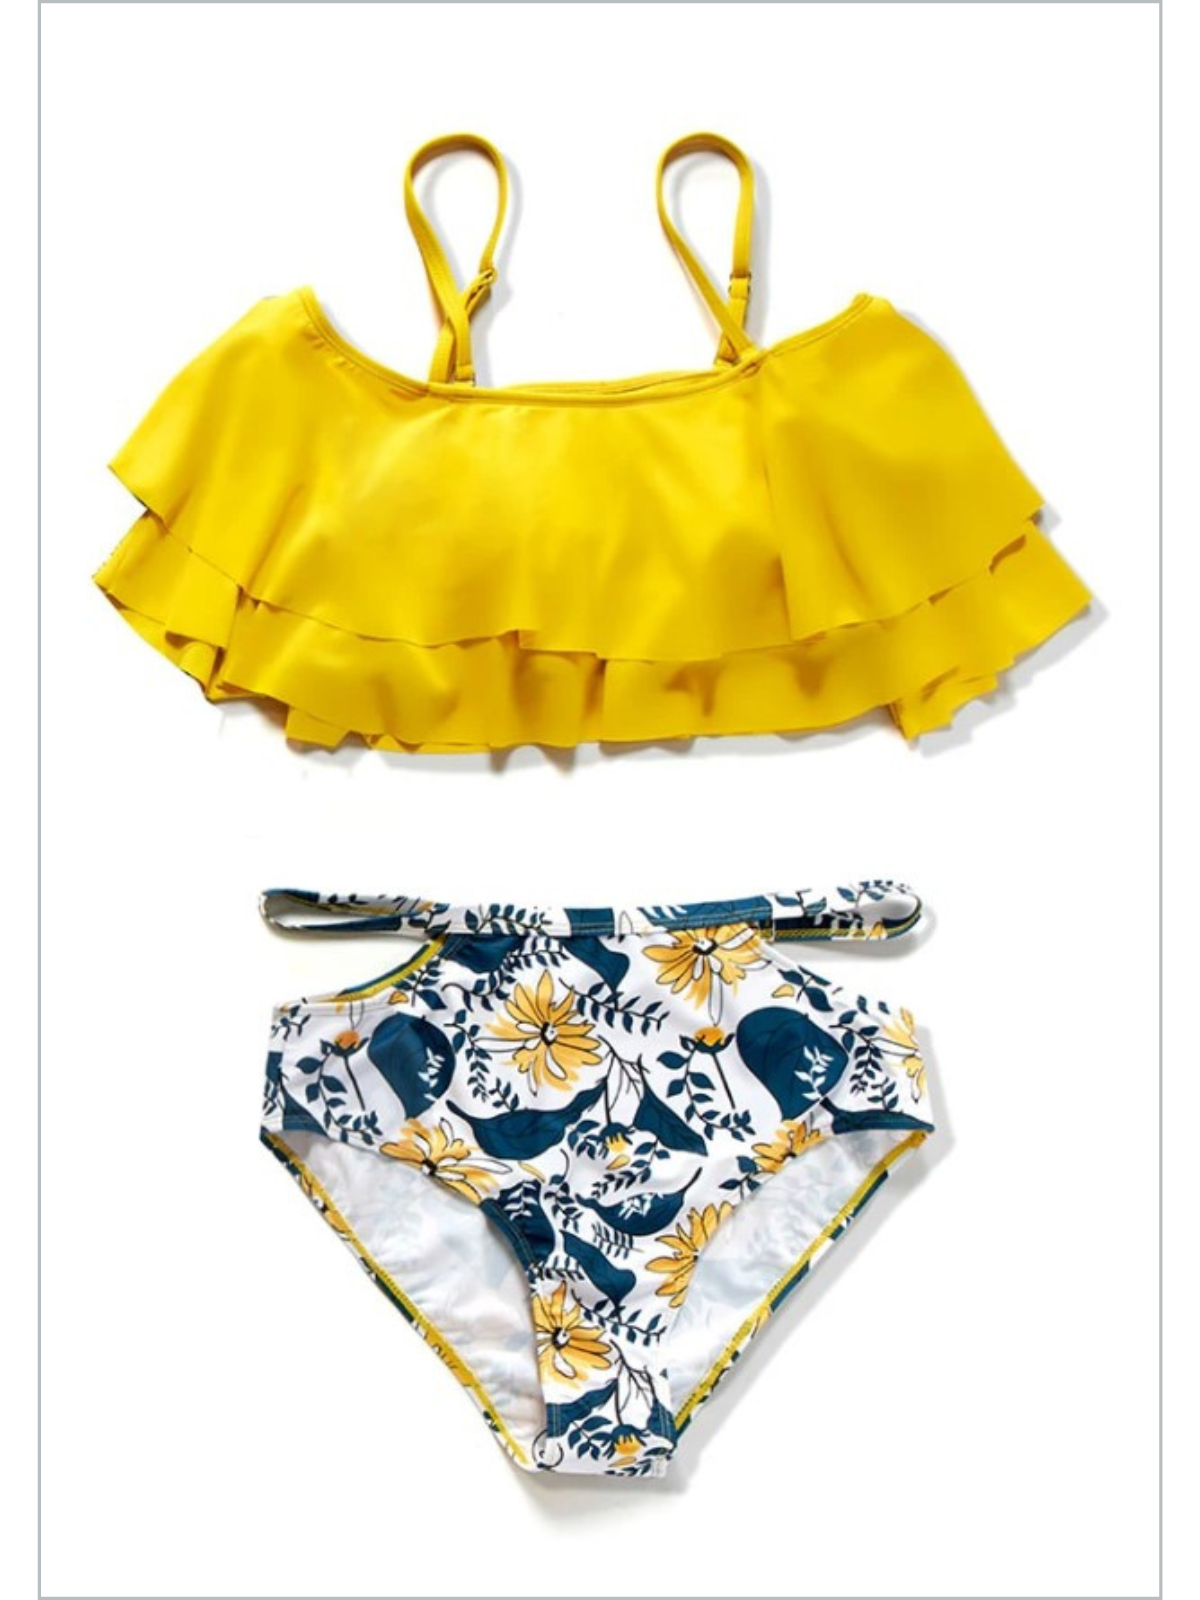 Family Swimsuits | Yellow Floral Tankini & Trunks | Mia Belle Girls